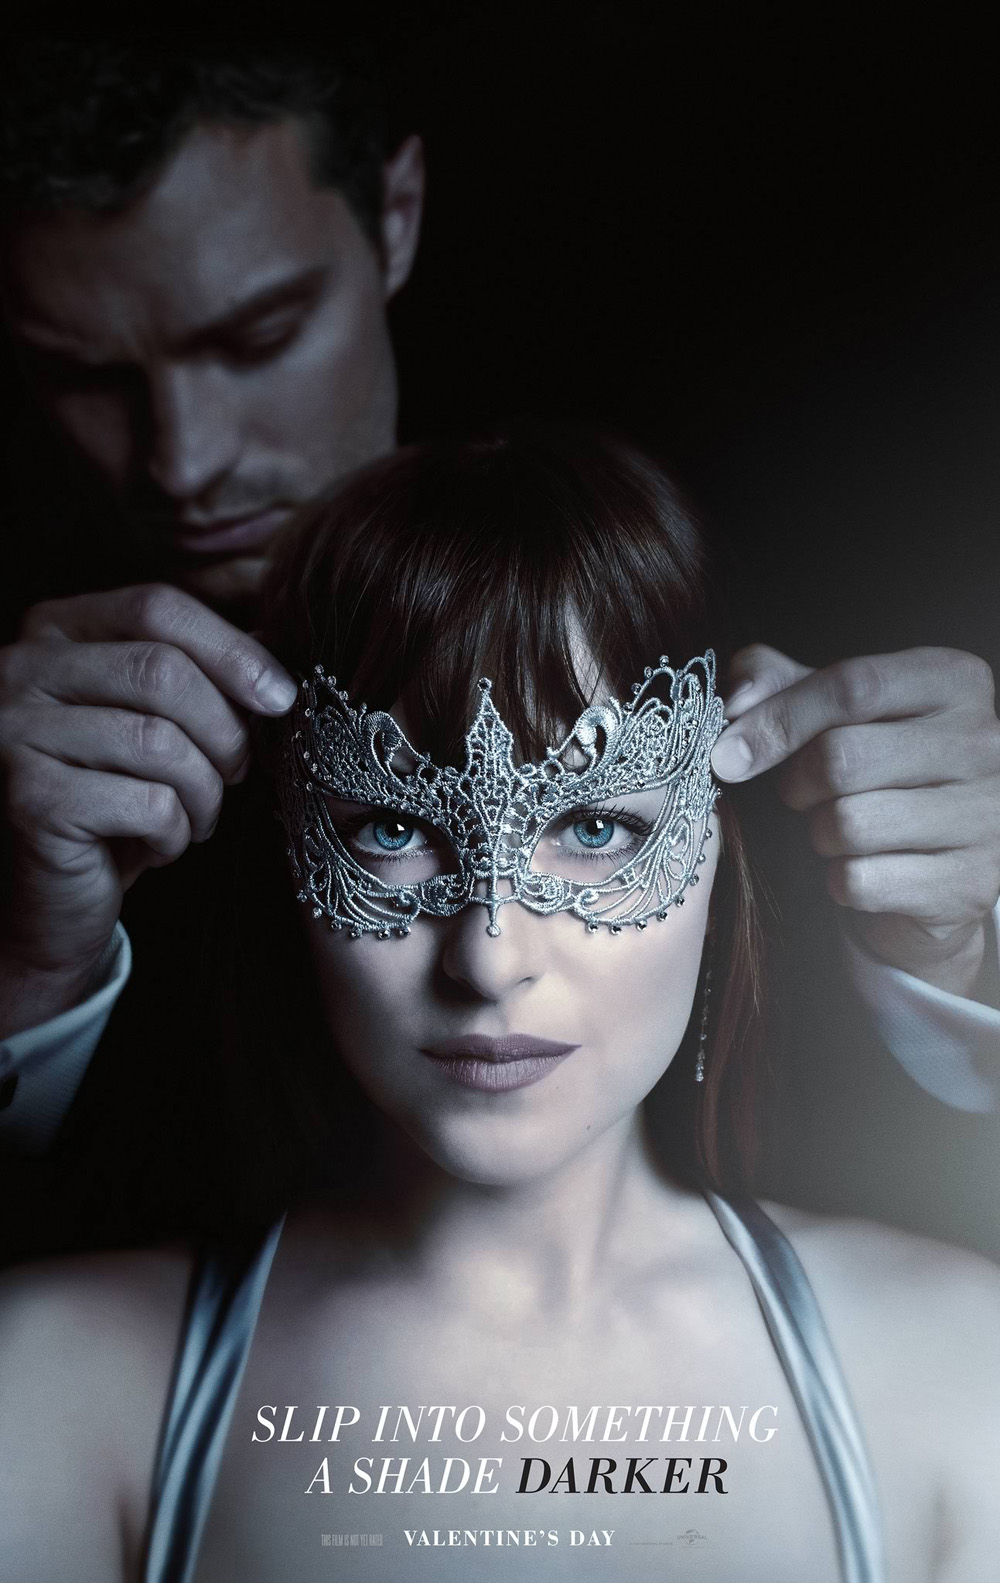 “Fifty Shades Darker” unmasks teaser poster, first trailer up tomorrow